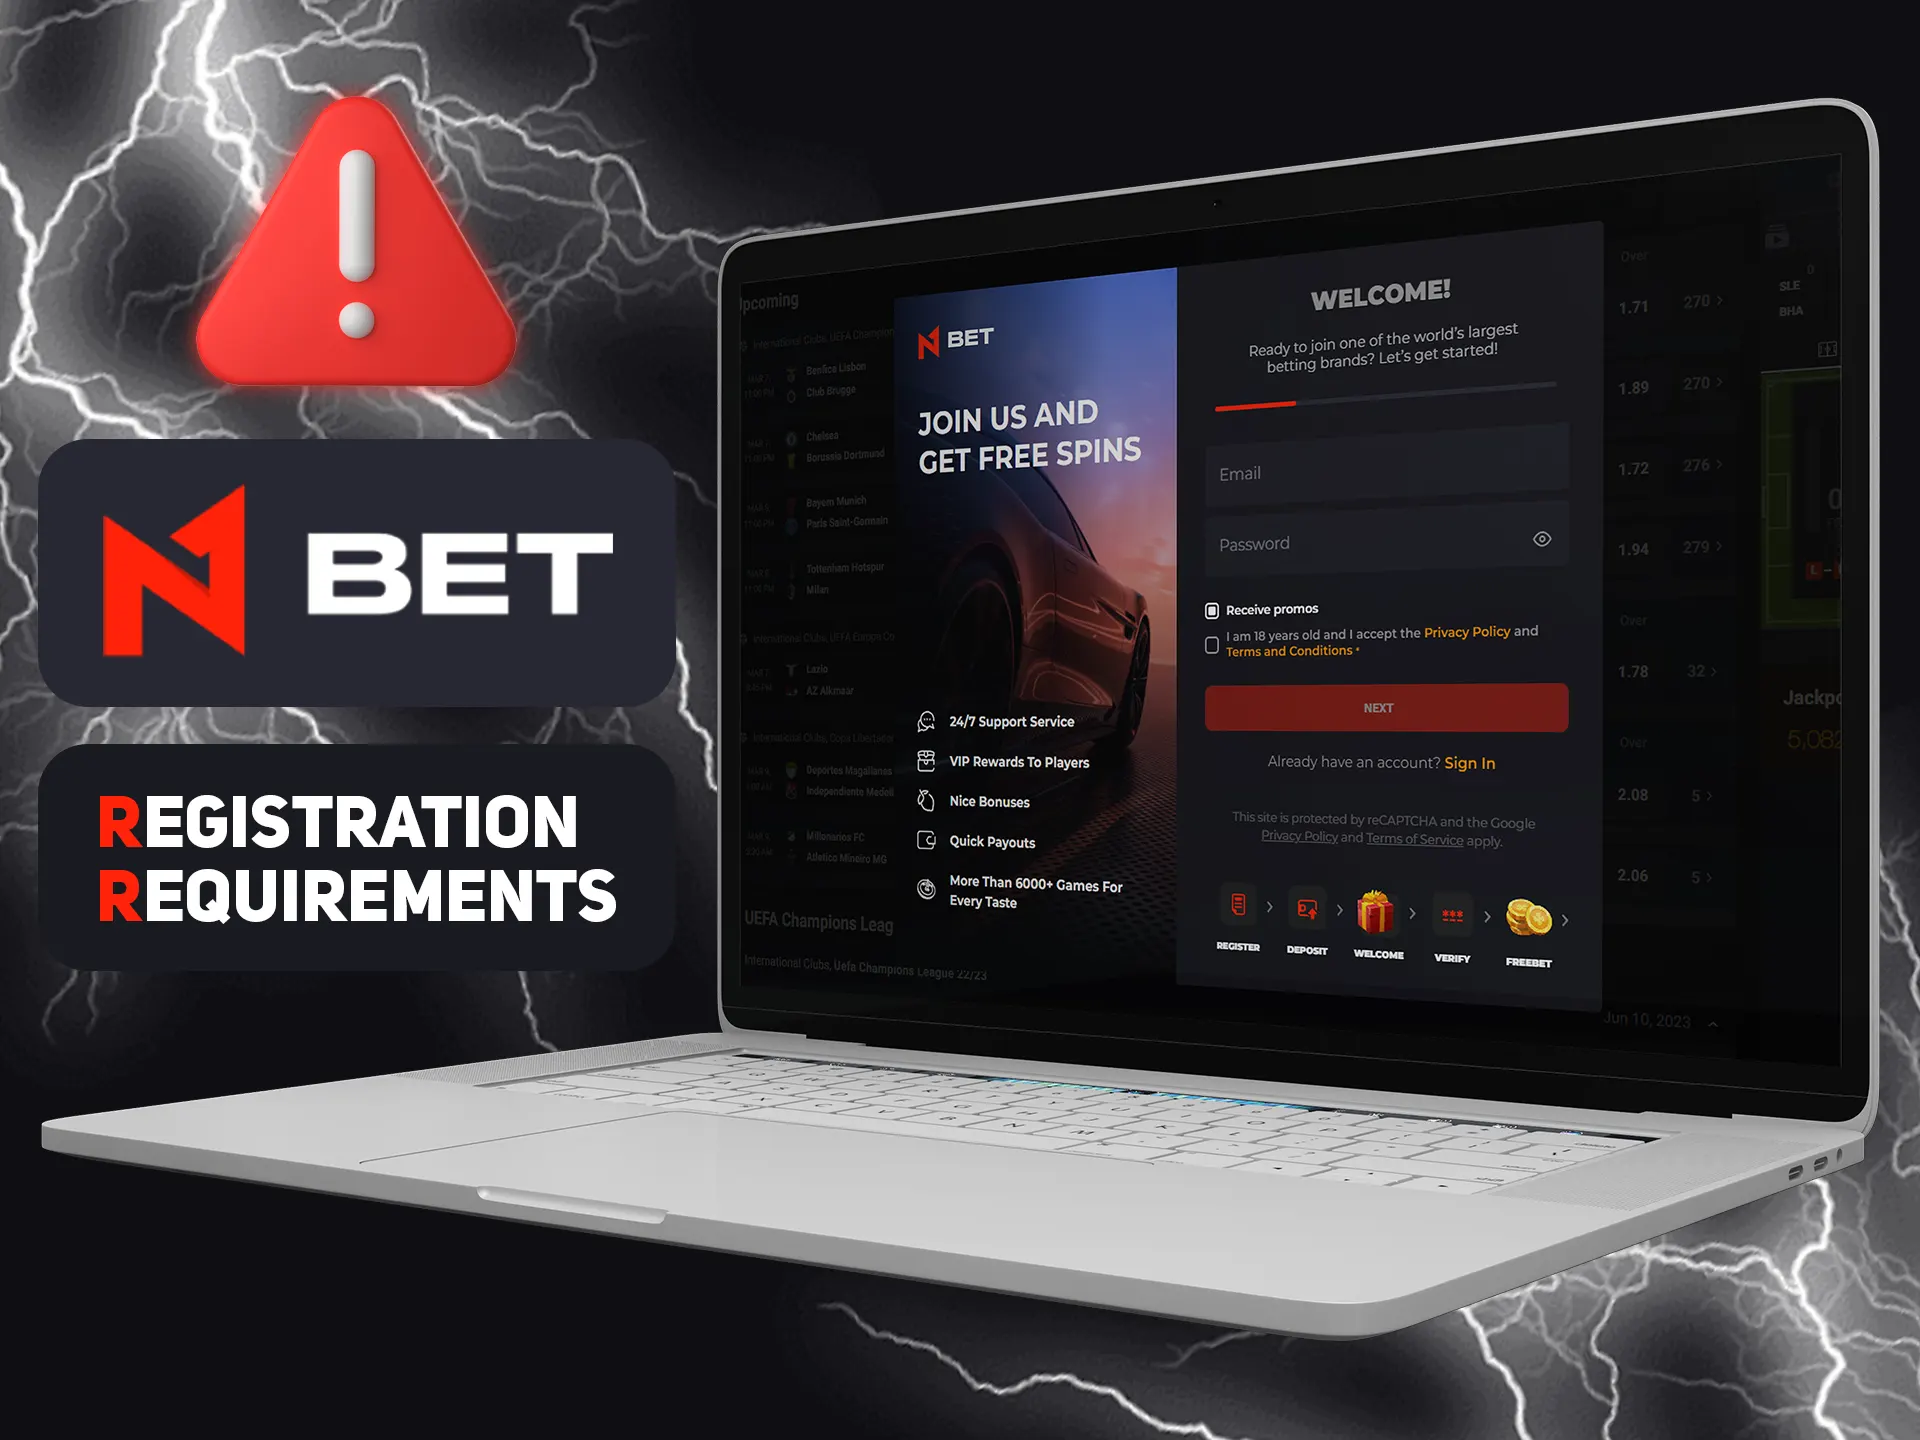 Read rules before register new account at N1bet.